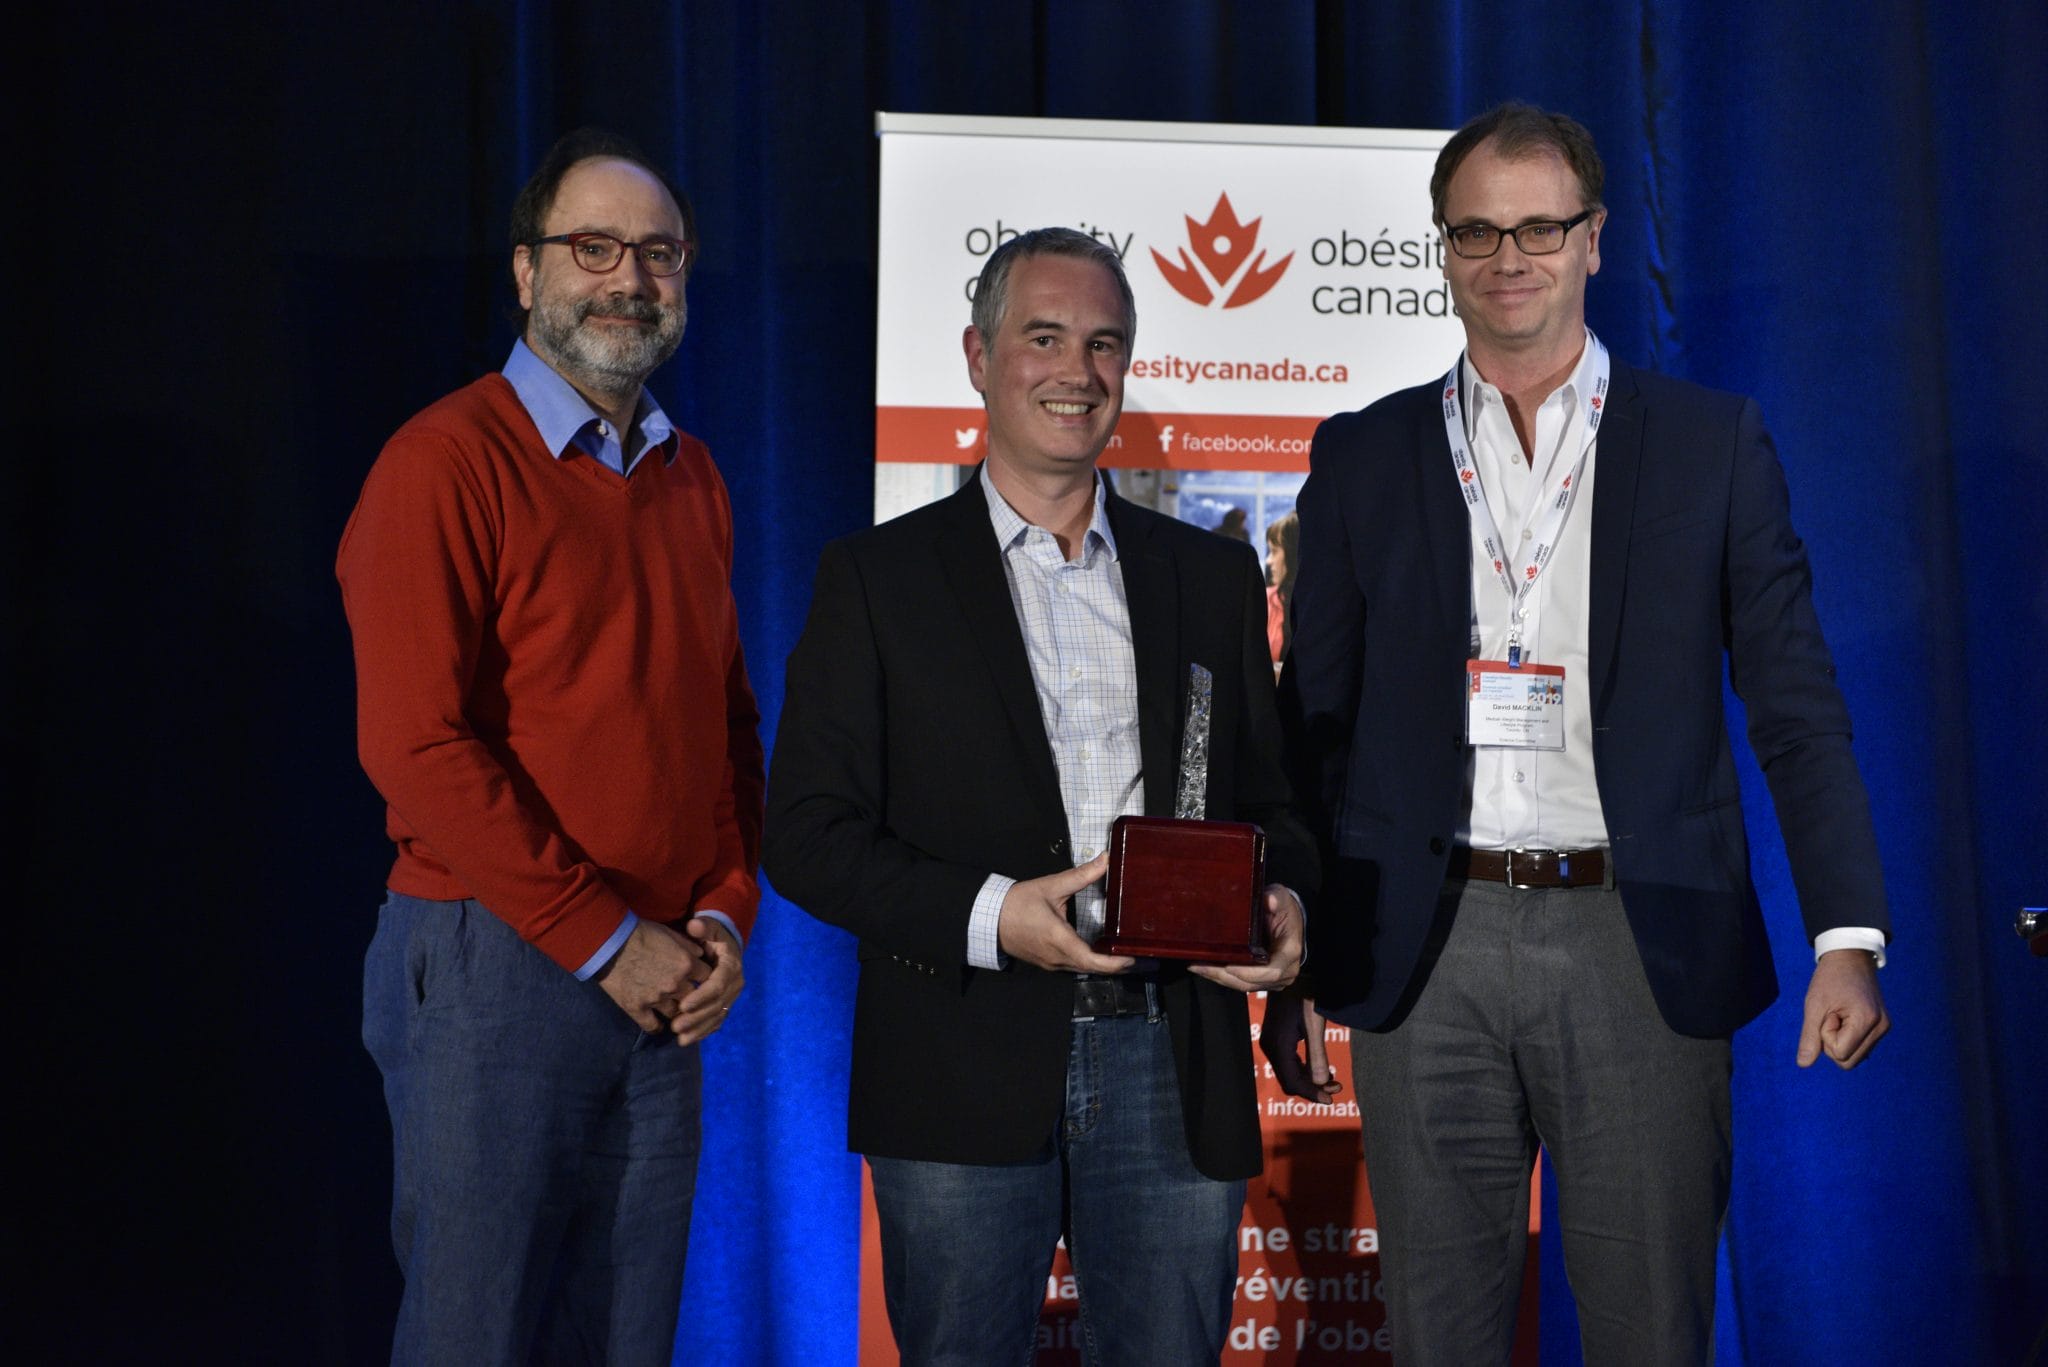 Three men on a stage at an event, one receiving an award, with a banner for obesity canada in the background.